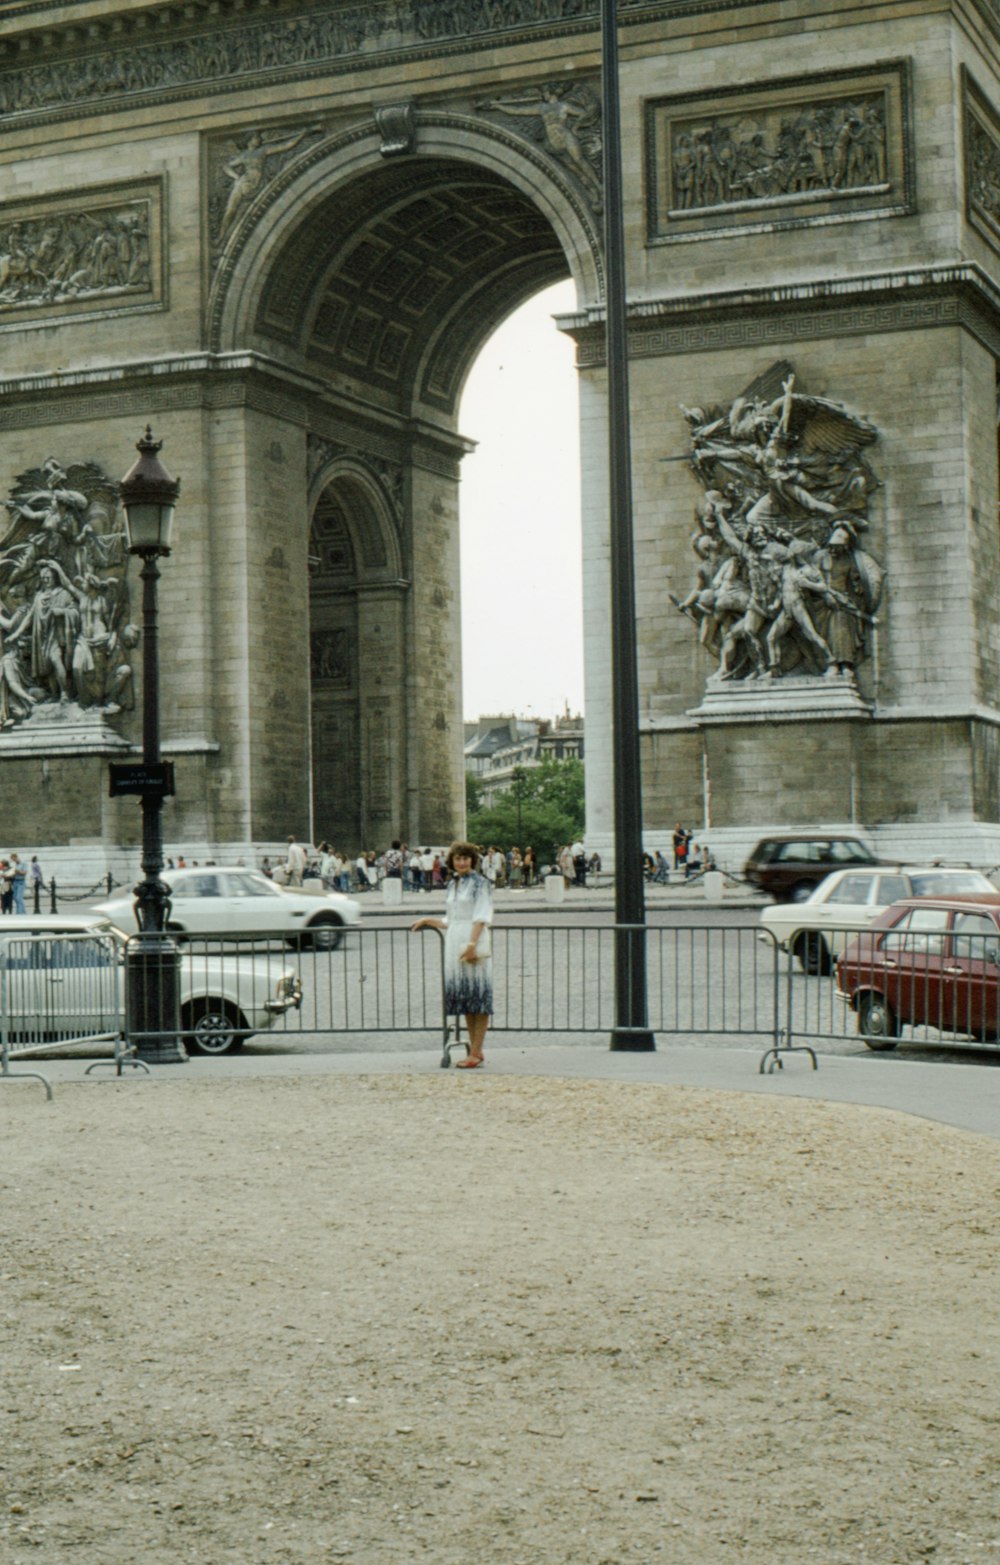 a man is standing in front of a gate